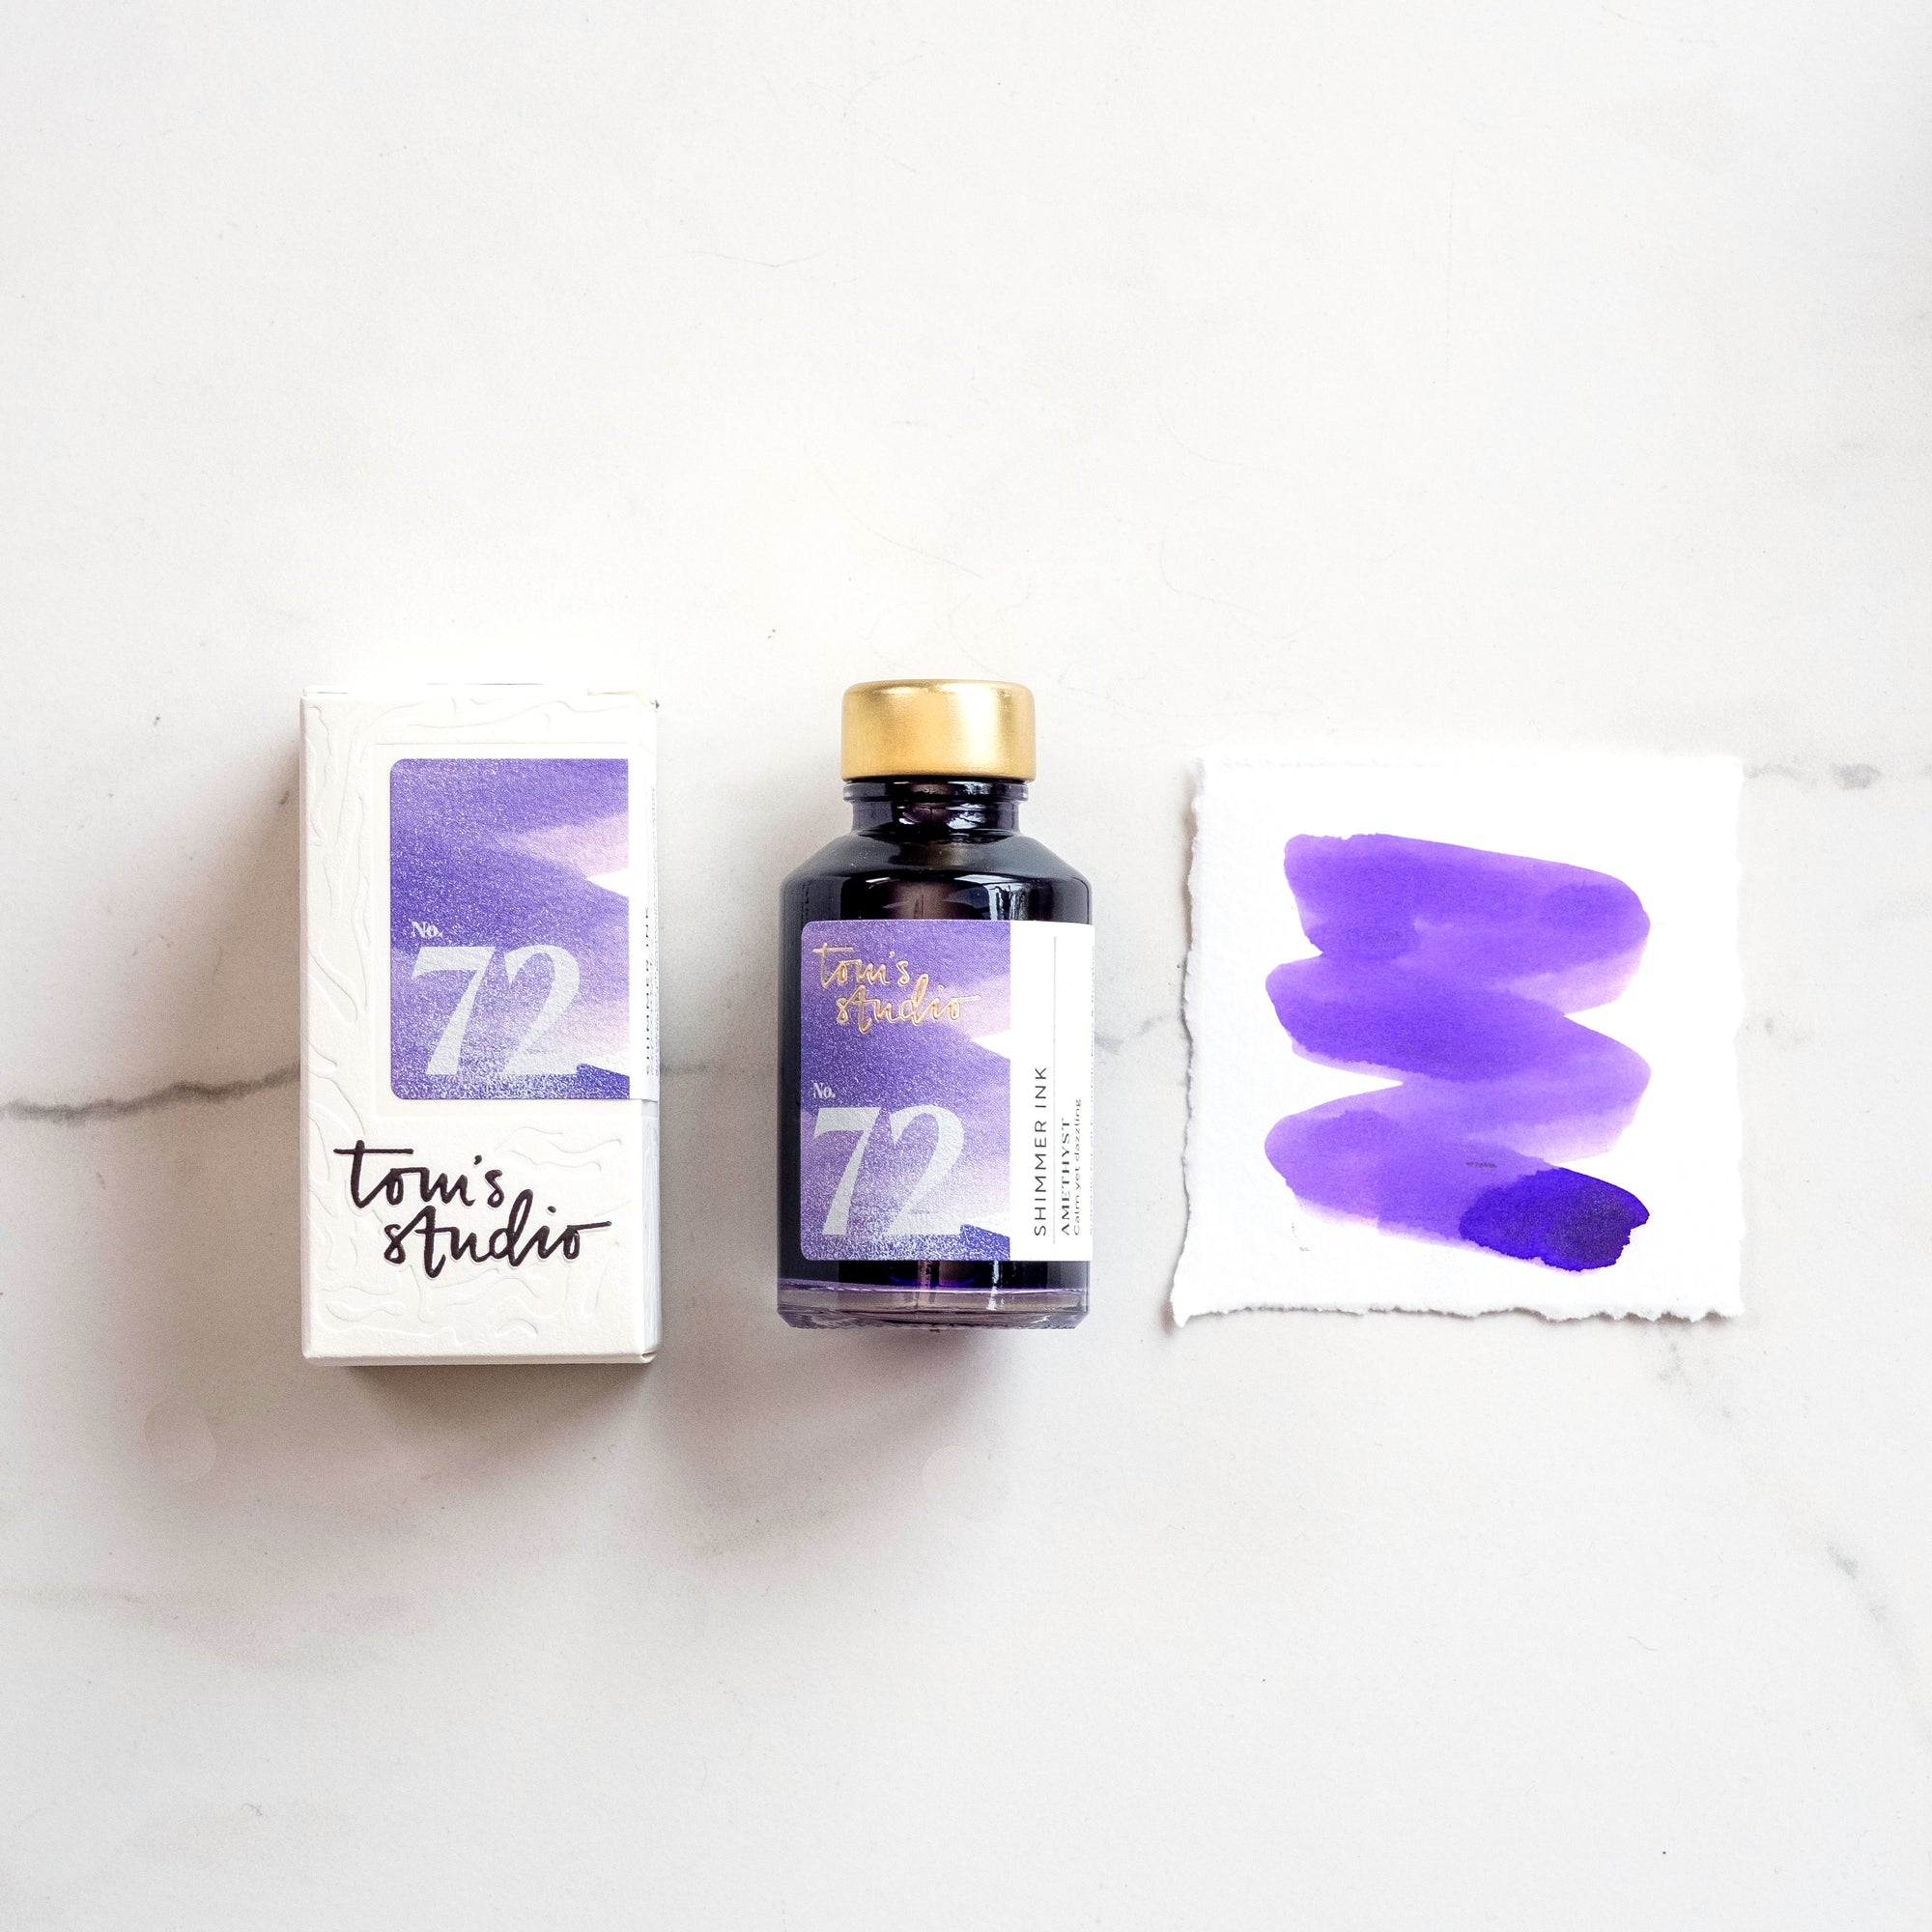 Tom's Studio Amethyst Shimmer Fountain Pen Ink with two pens with inky goodness on paper with an ink swatch demonstrating the colour